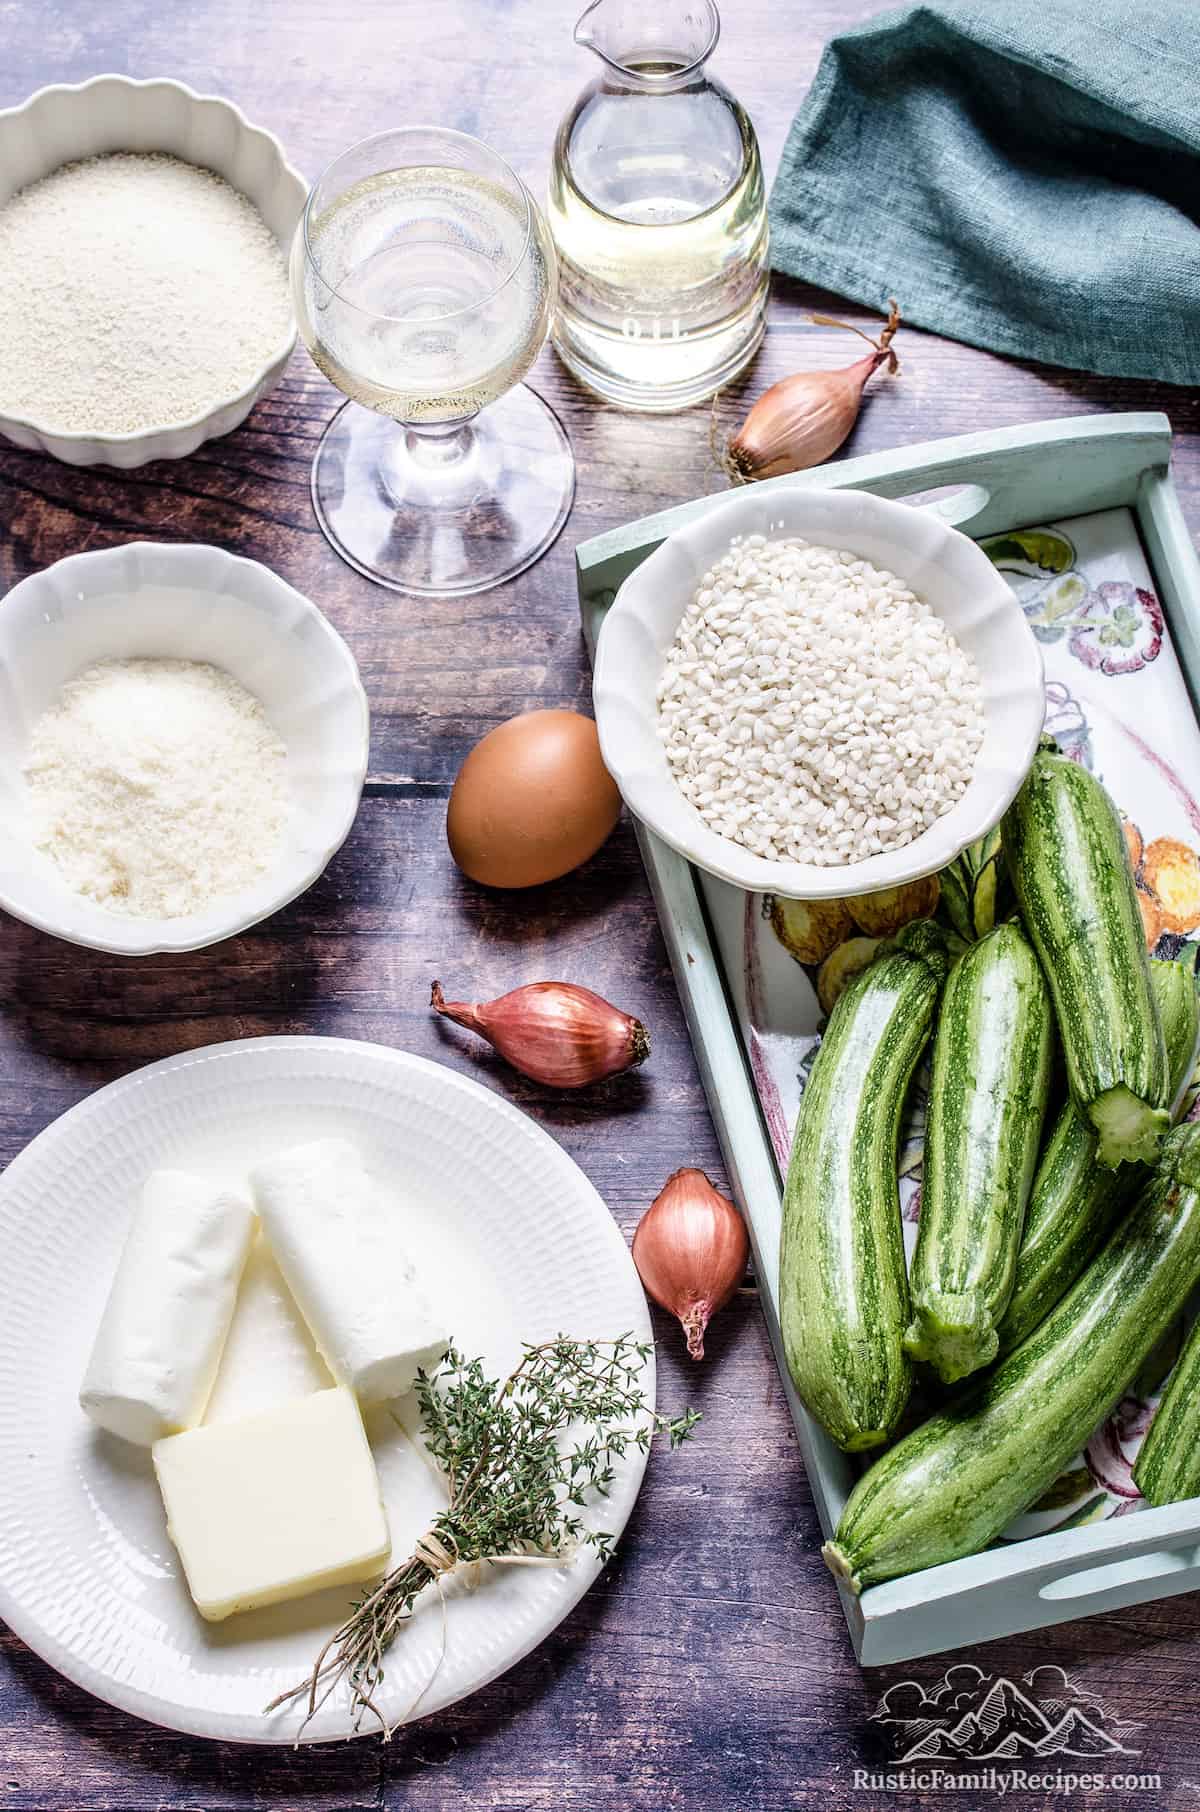 The ingredients for homemade arancini with zucchini and goat cheese.